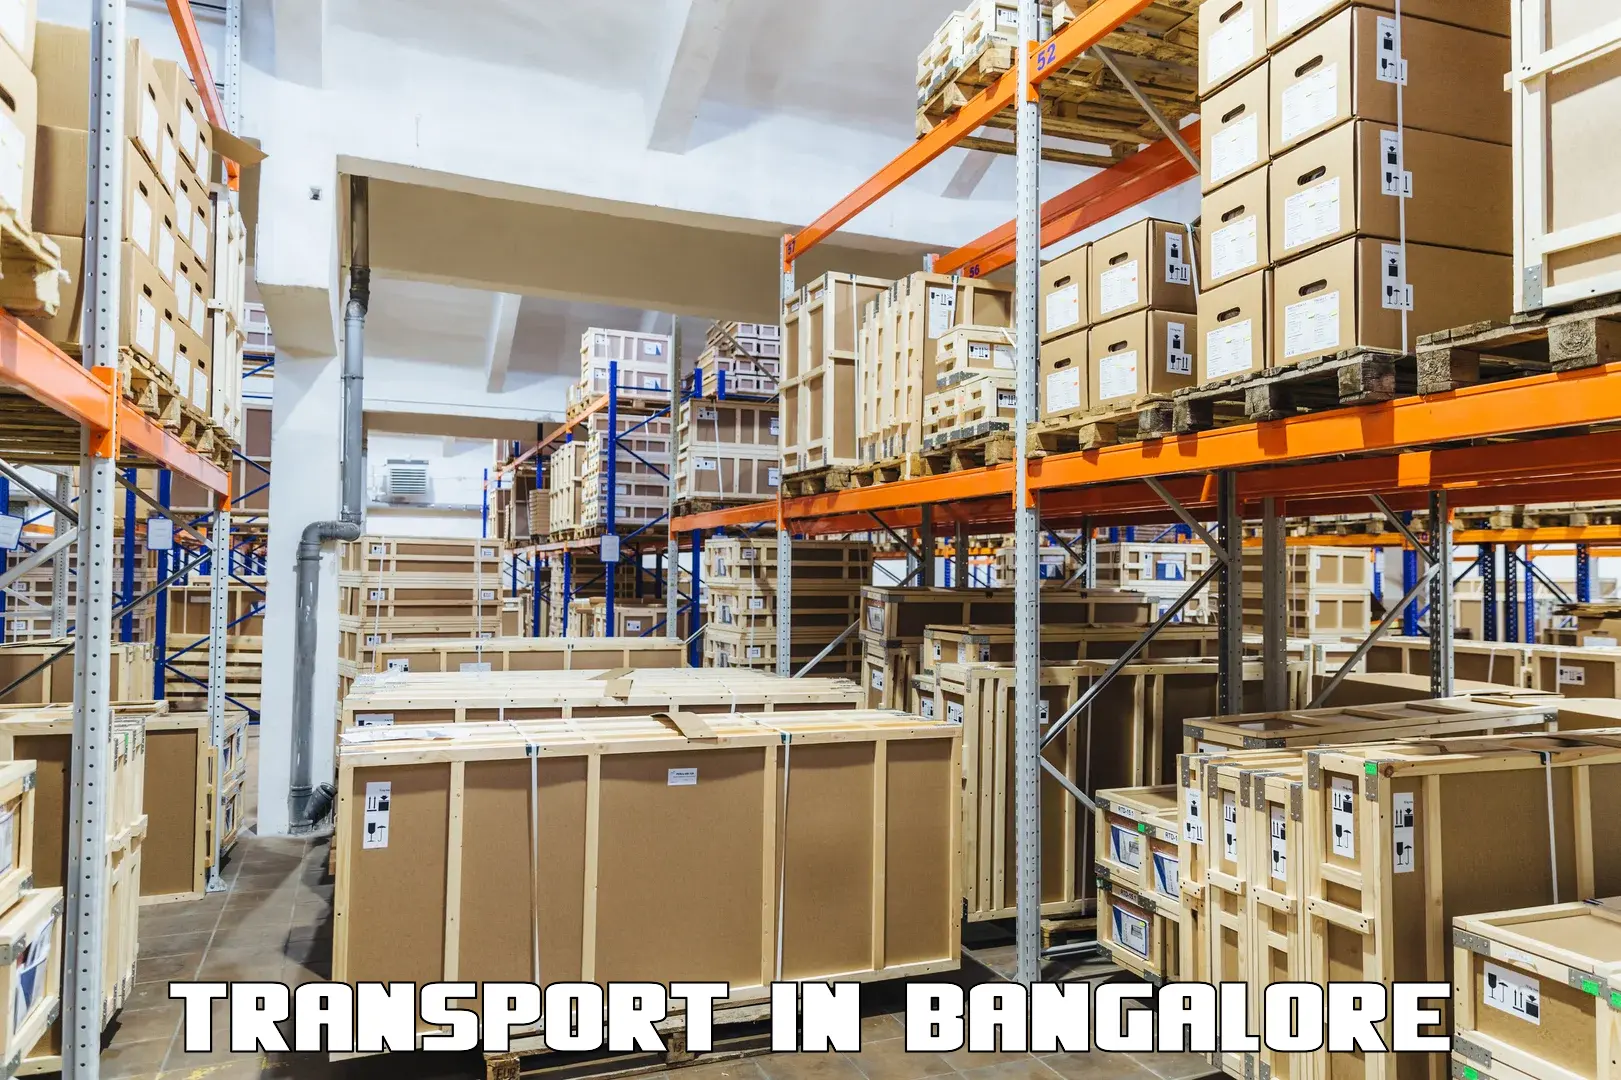 Land transport services in Bangalore